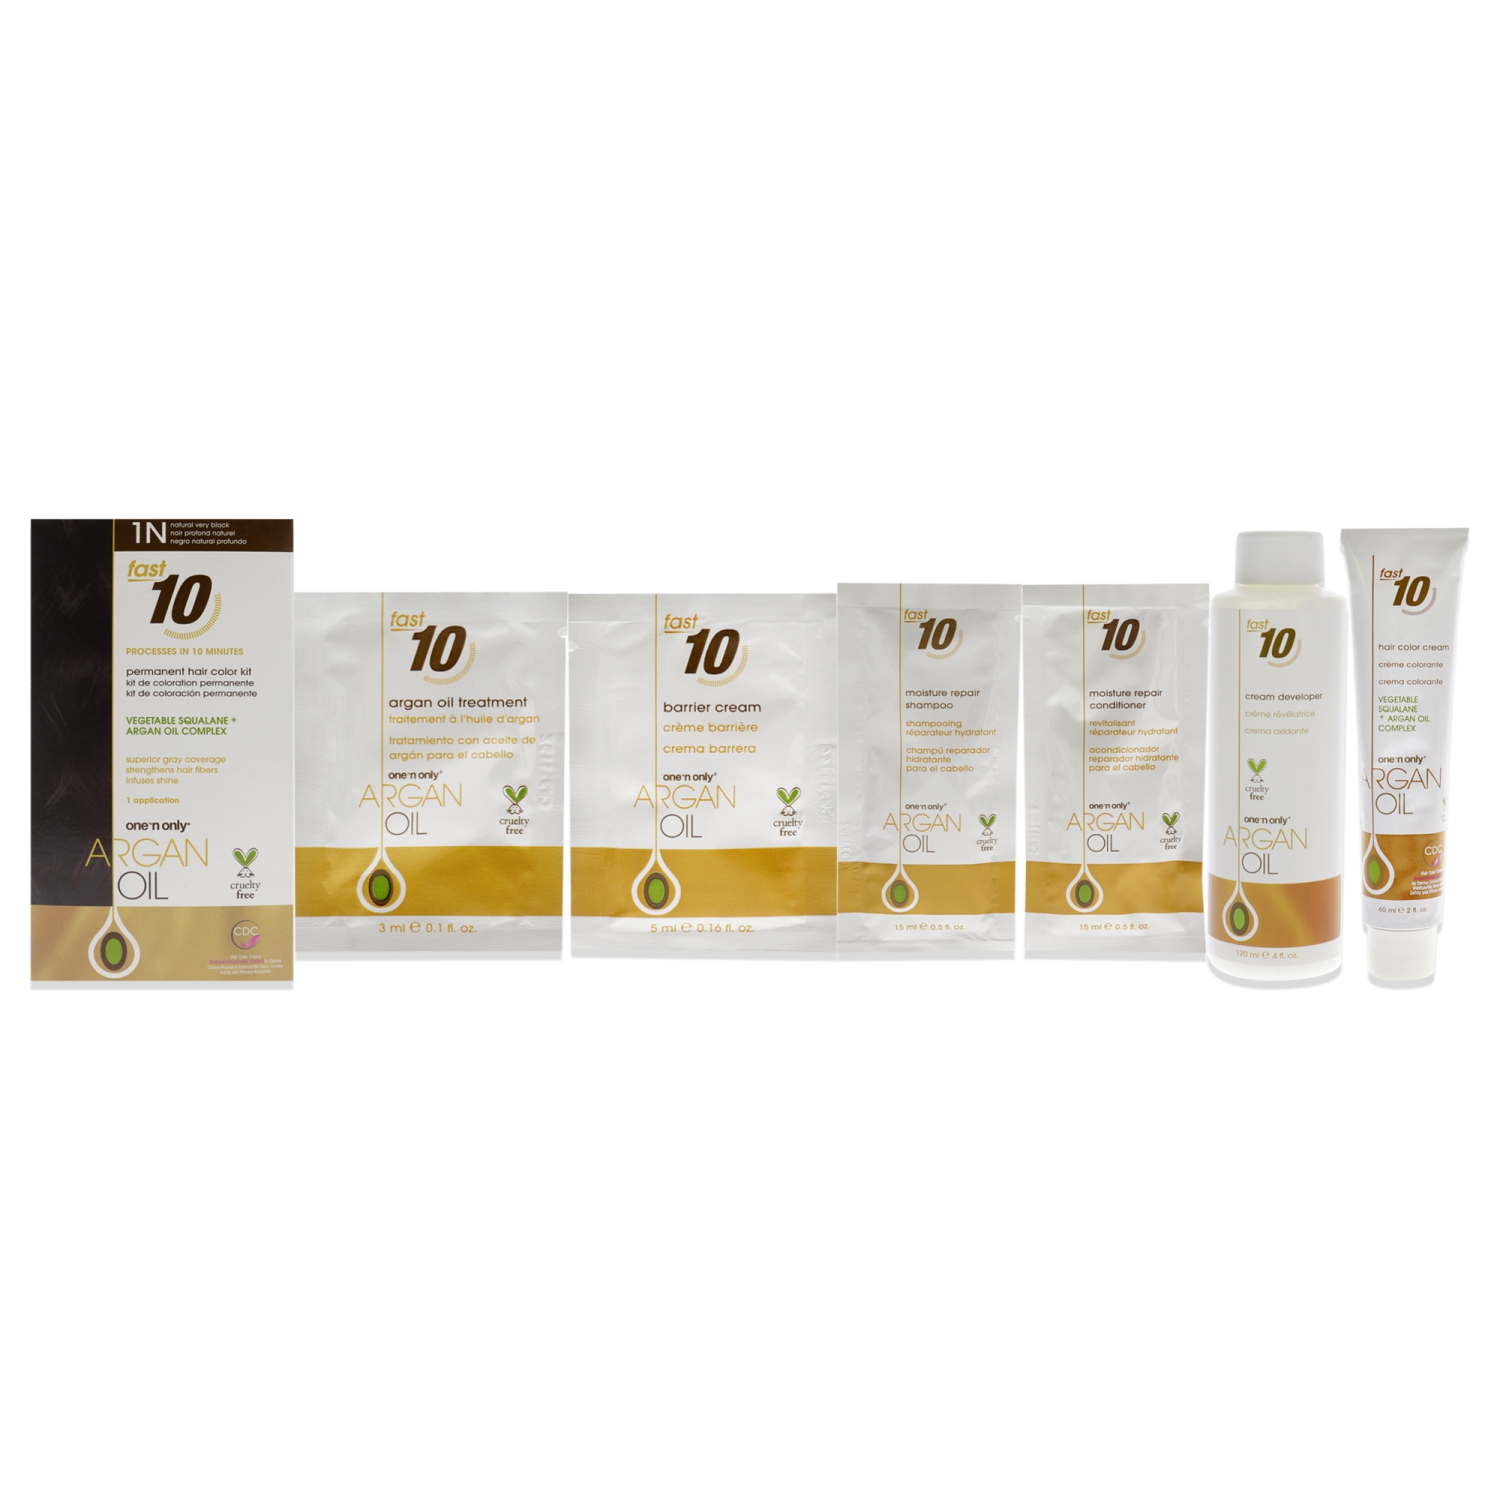 Argan Oil Fast 10 Permanent Hair Color Kit - 1N Natural Very Black by One n Only for Unisex - 1 Pc Hair Color